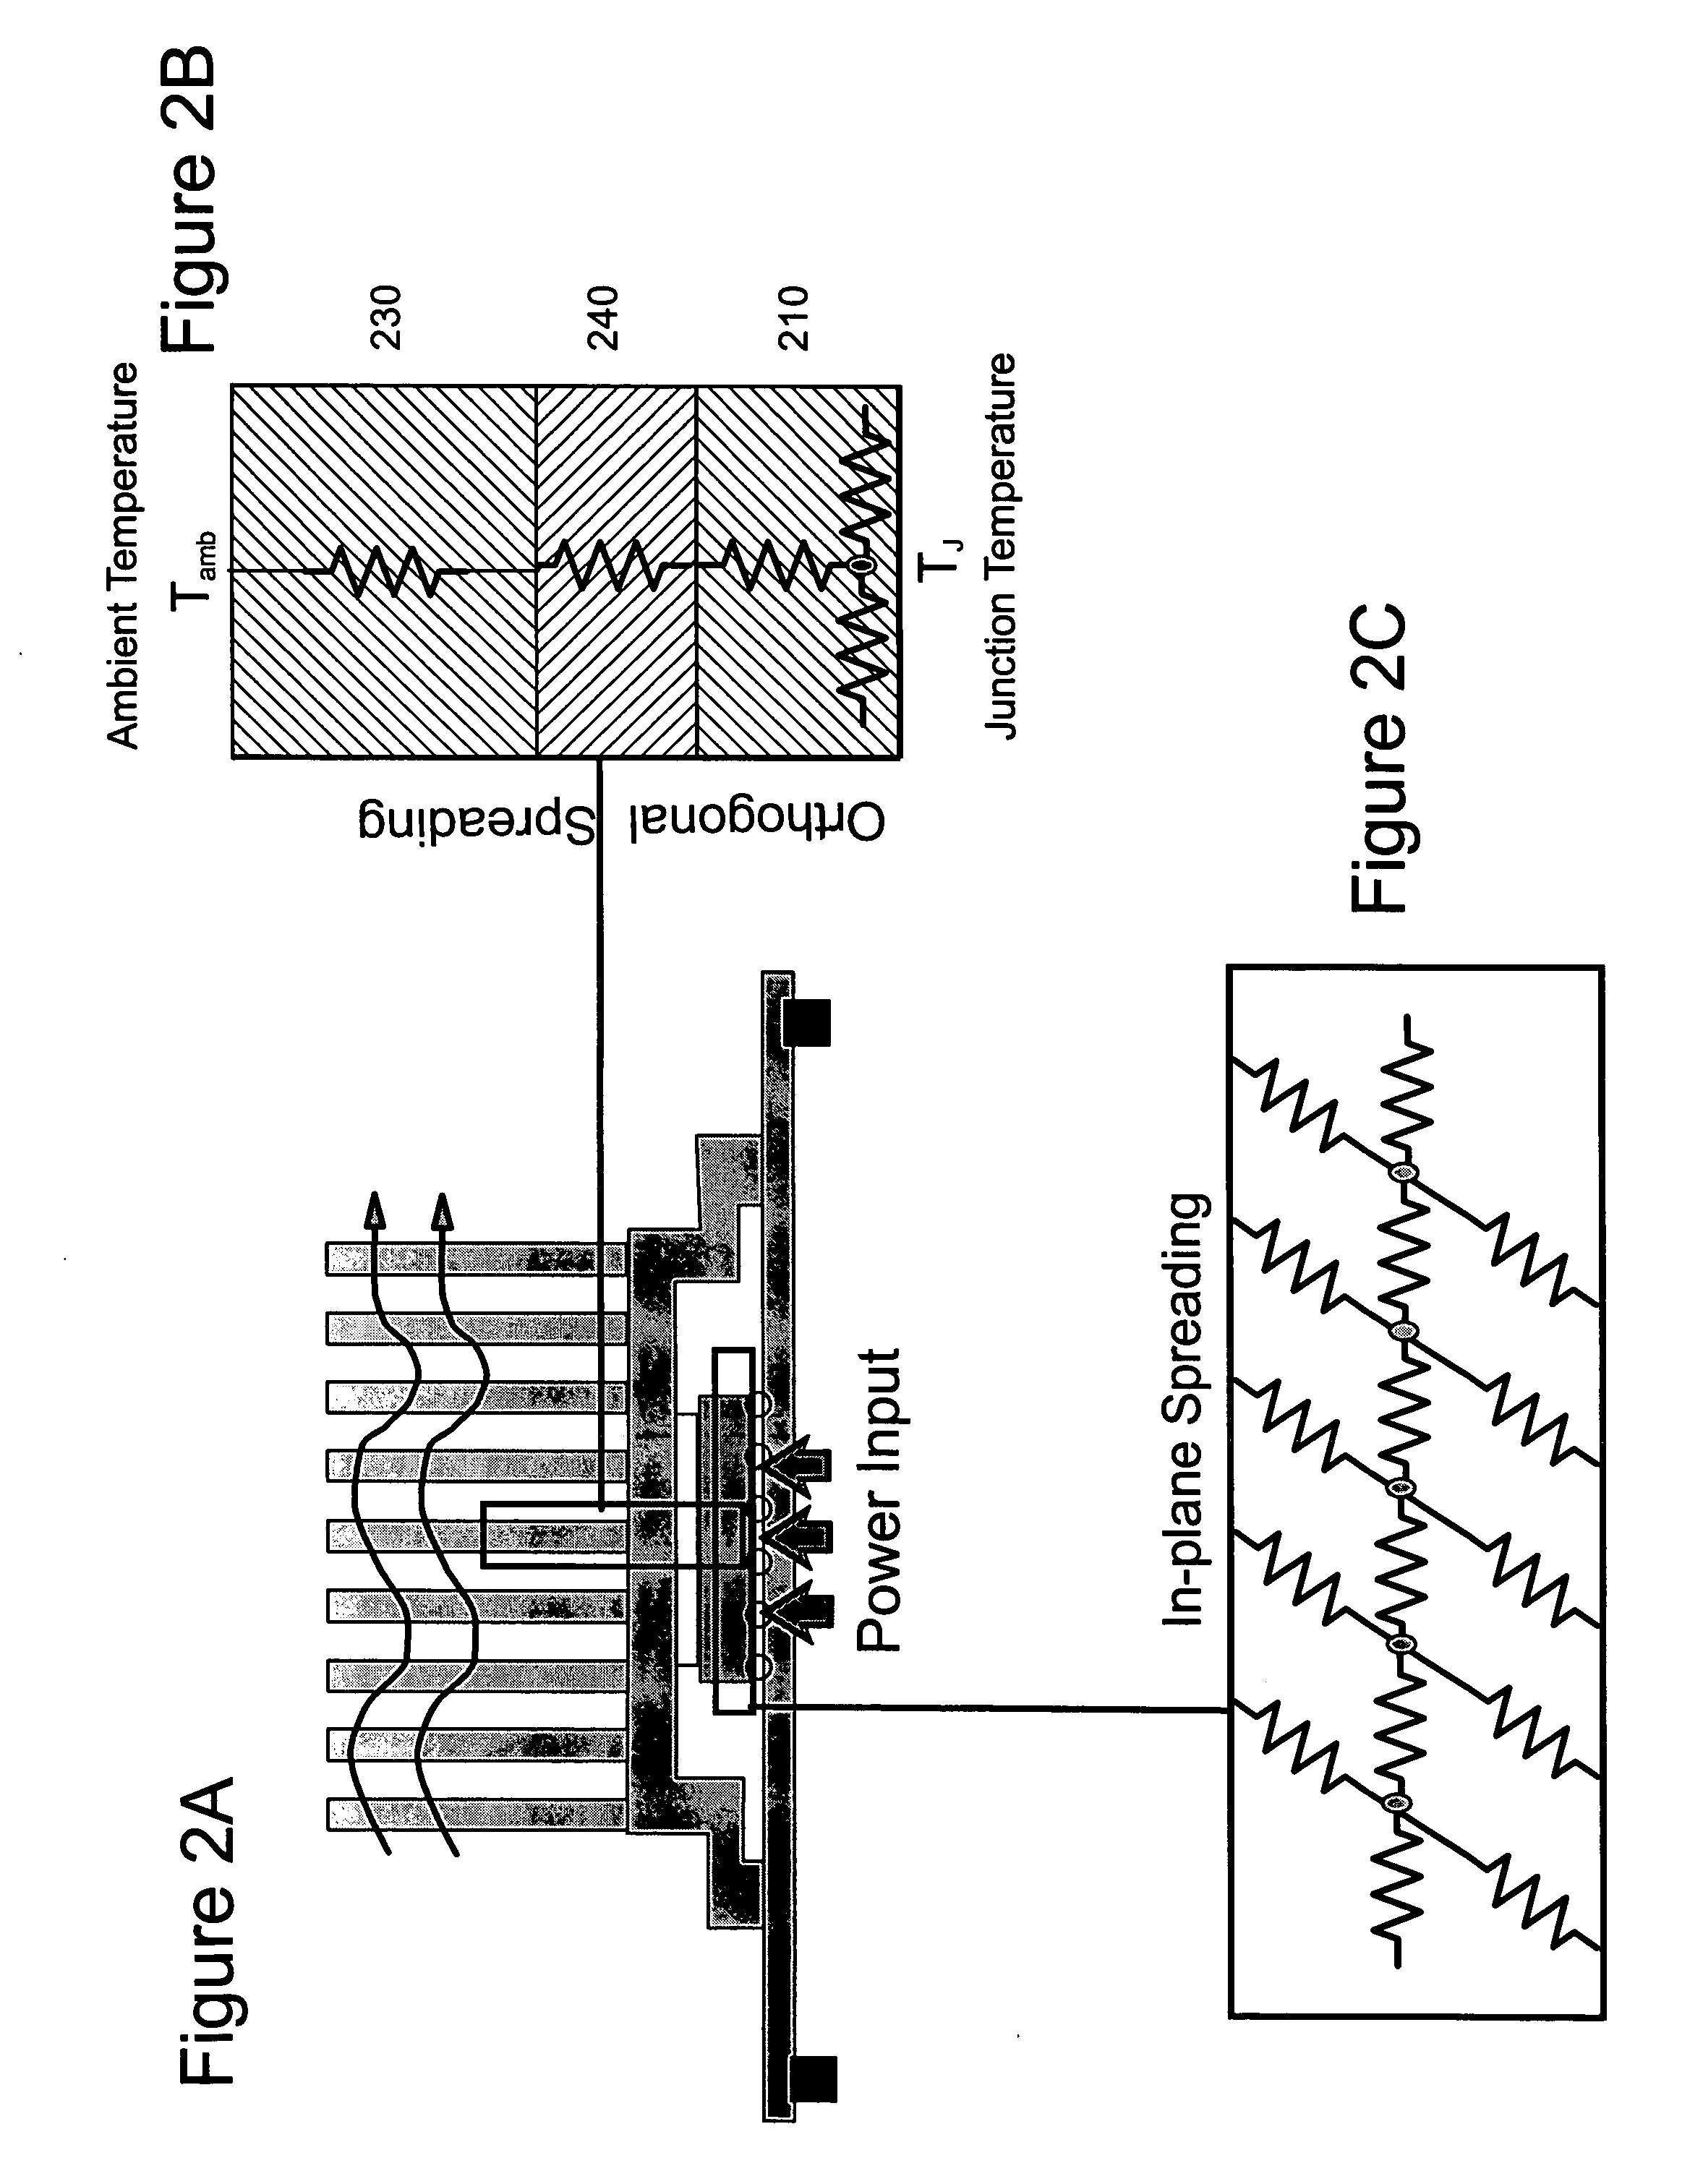 Method and system for real-time estimation and prediction of the thermal state of a microprocessor unit